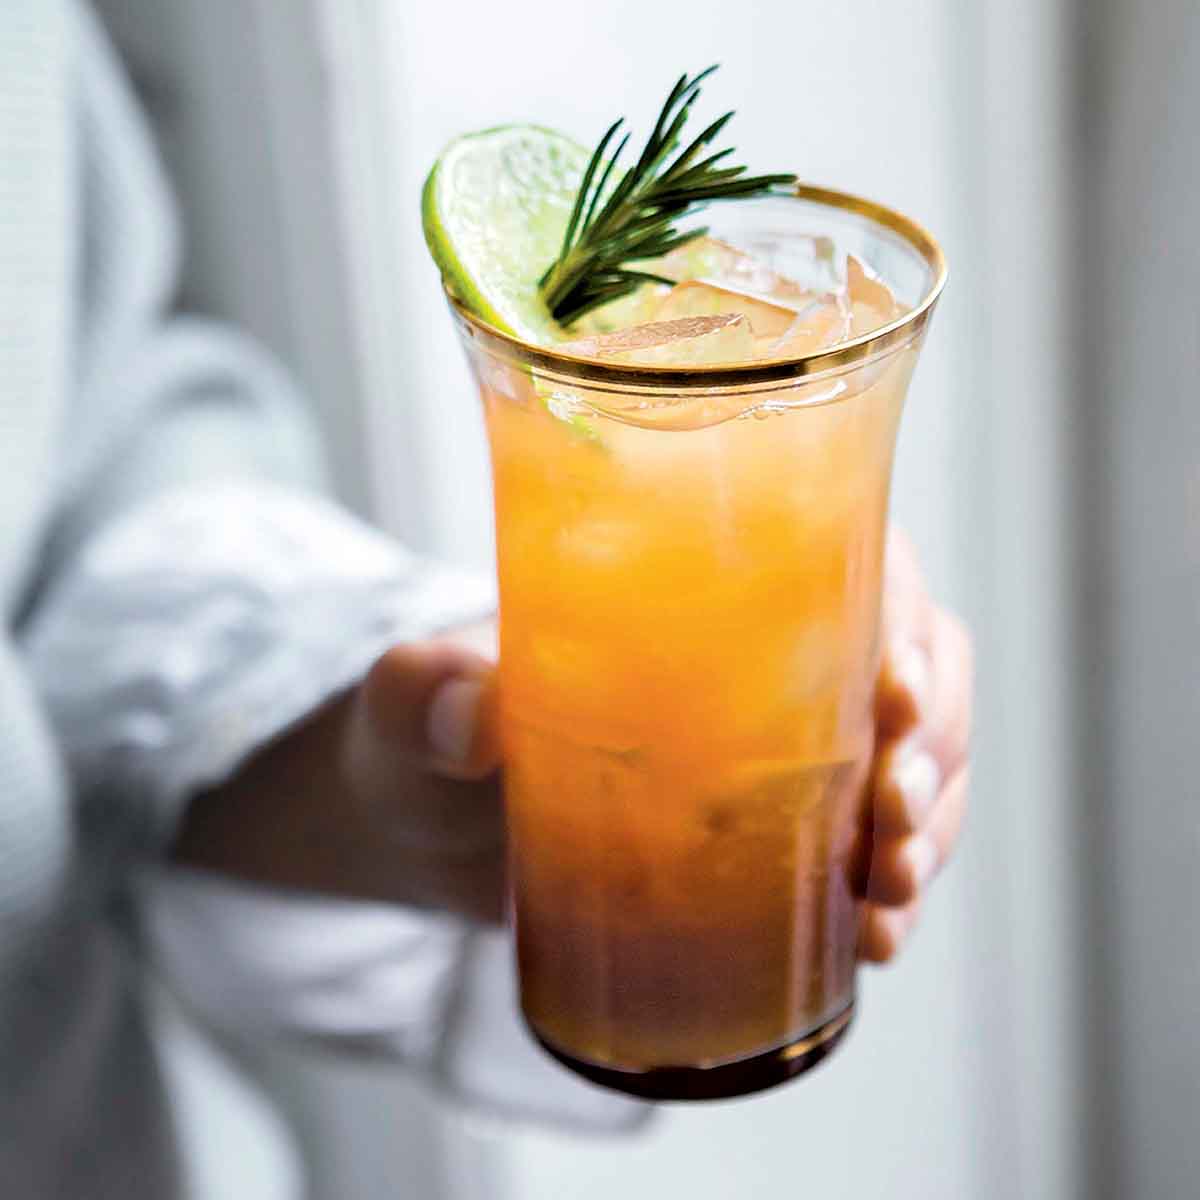 A tall cool glass of a winter mojito made with rum and a sugar syrup of rosemary, thyme, sage leaves.